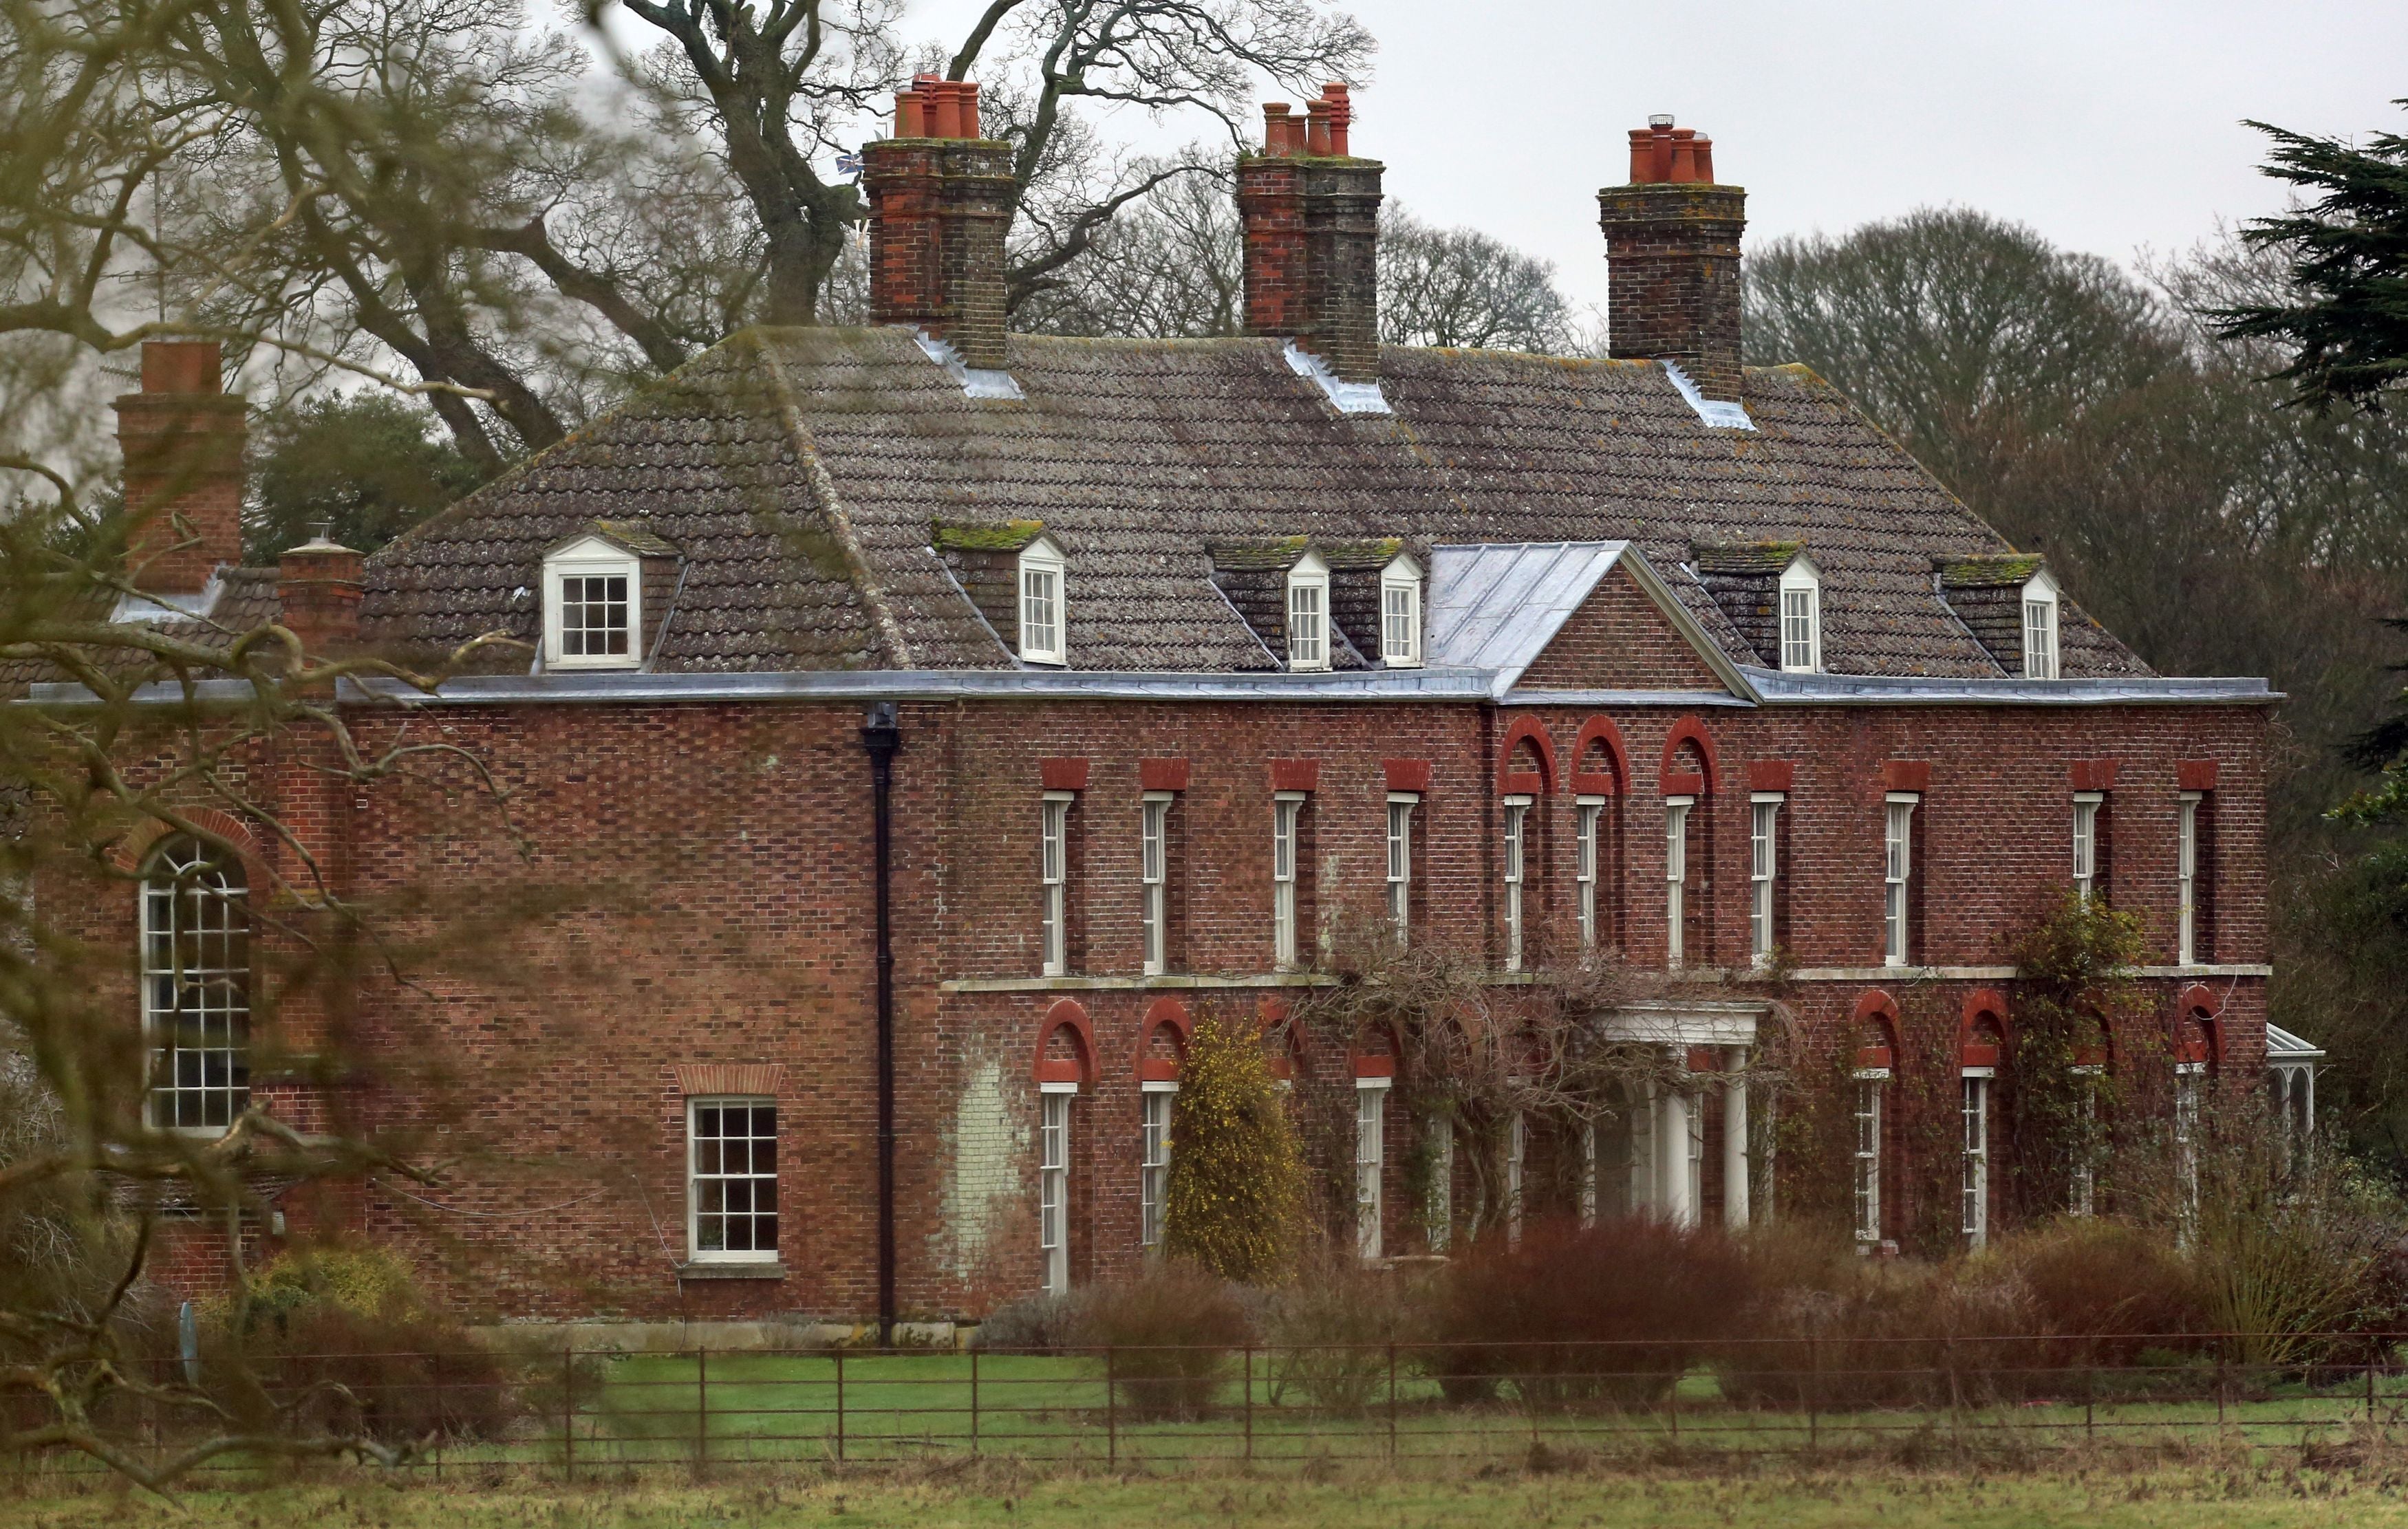 Anmer Hall, the Prince and Princess of Wales’s 10-bedroom country retreat, was a gift to the couple from the Queen following their wedding